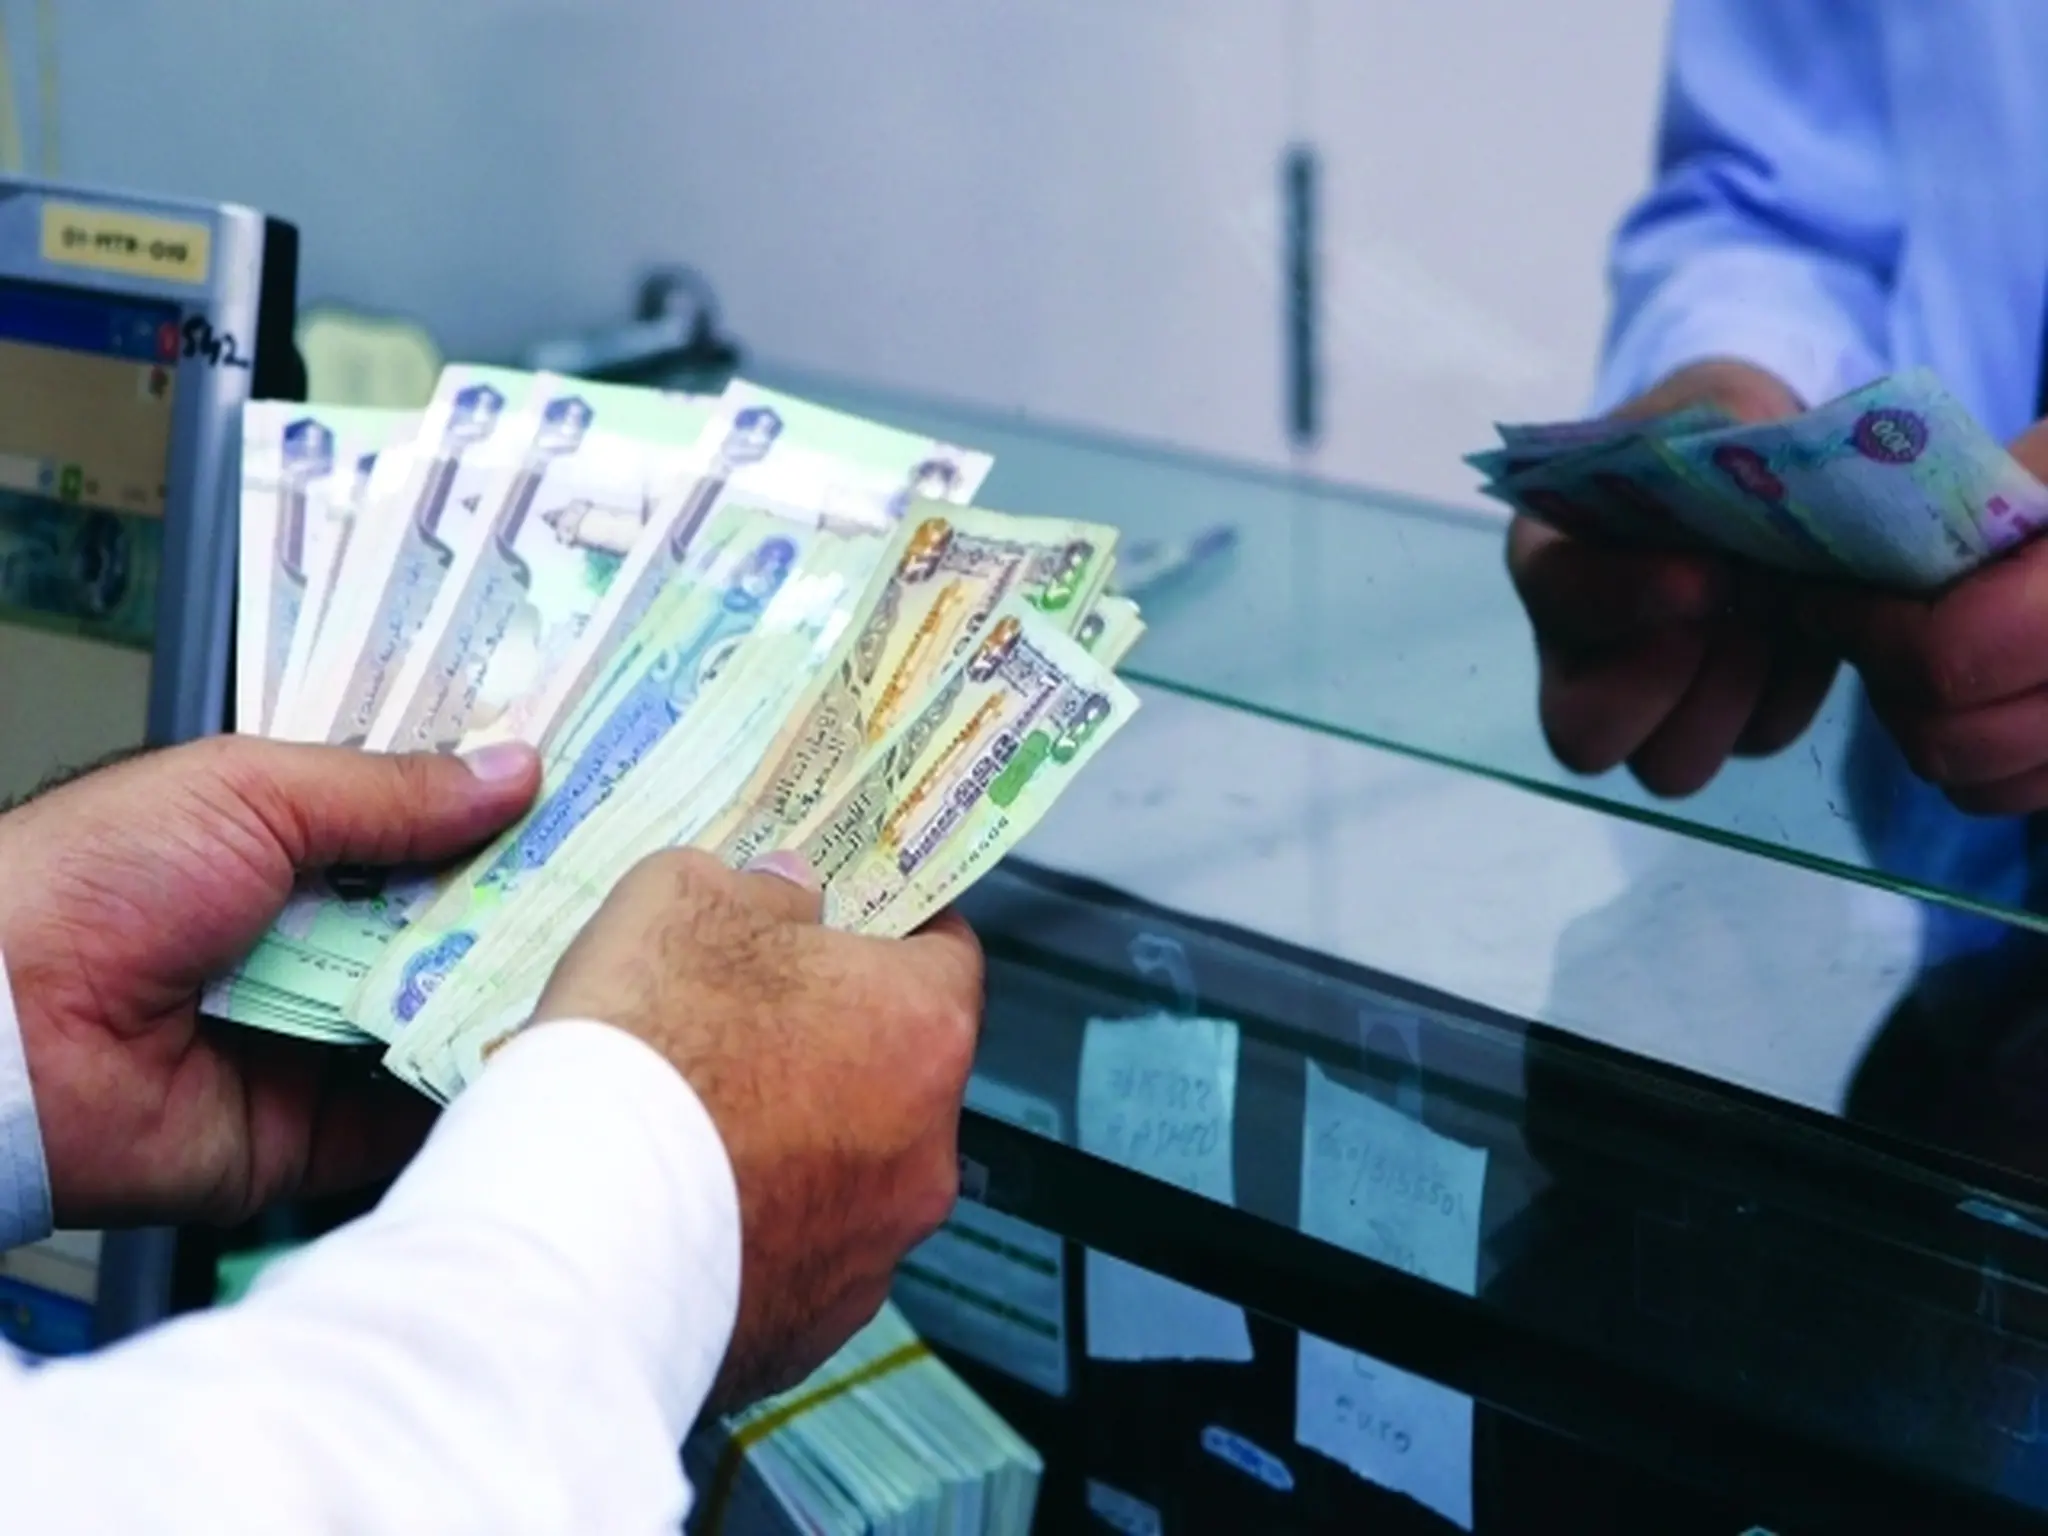 UAE.. 11,000 dirhams in compensation for a foreign worker who was arbitrarily dismissed from her job